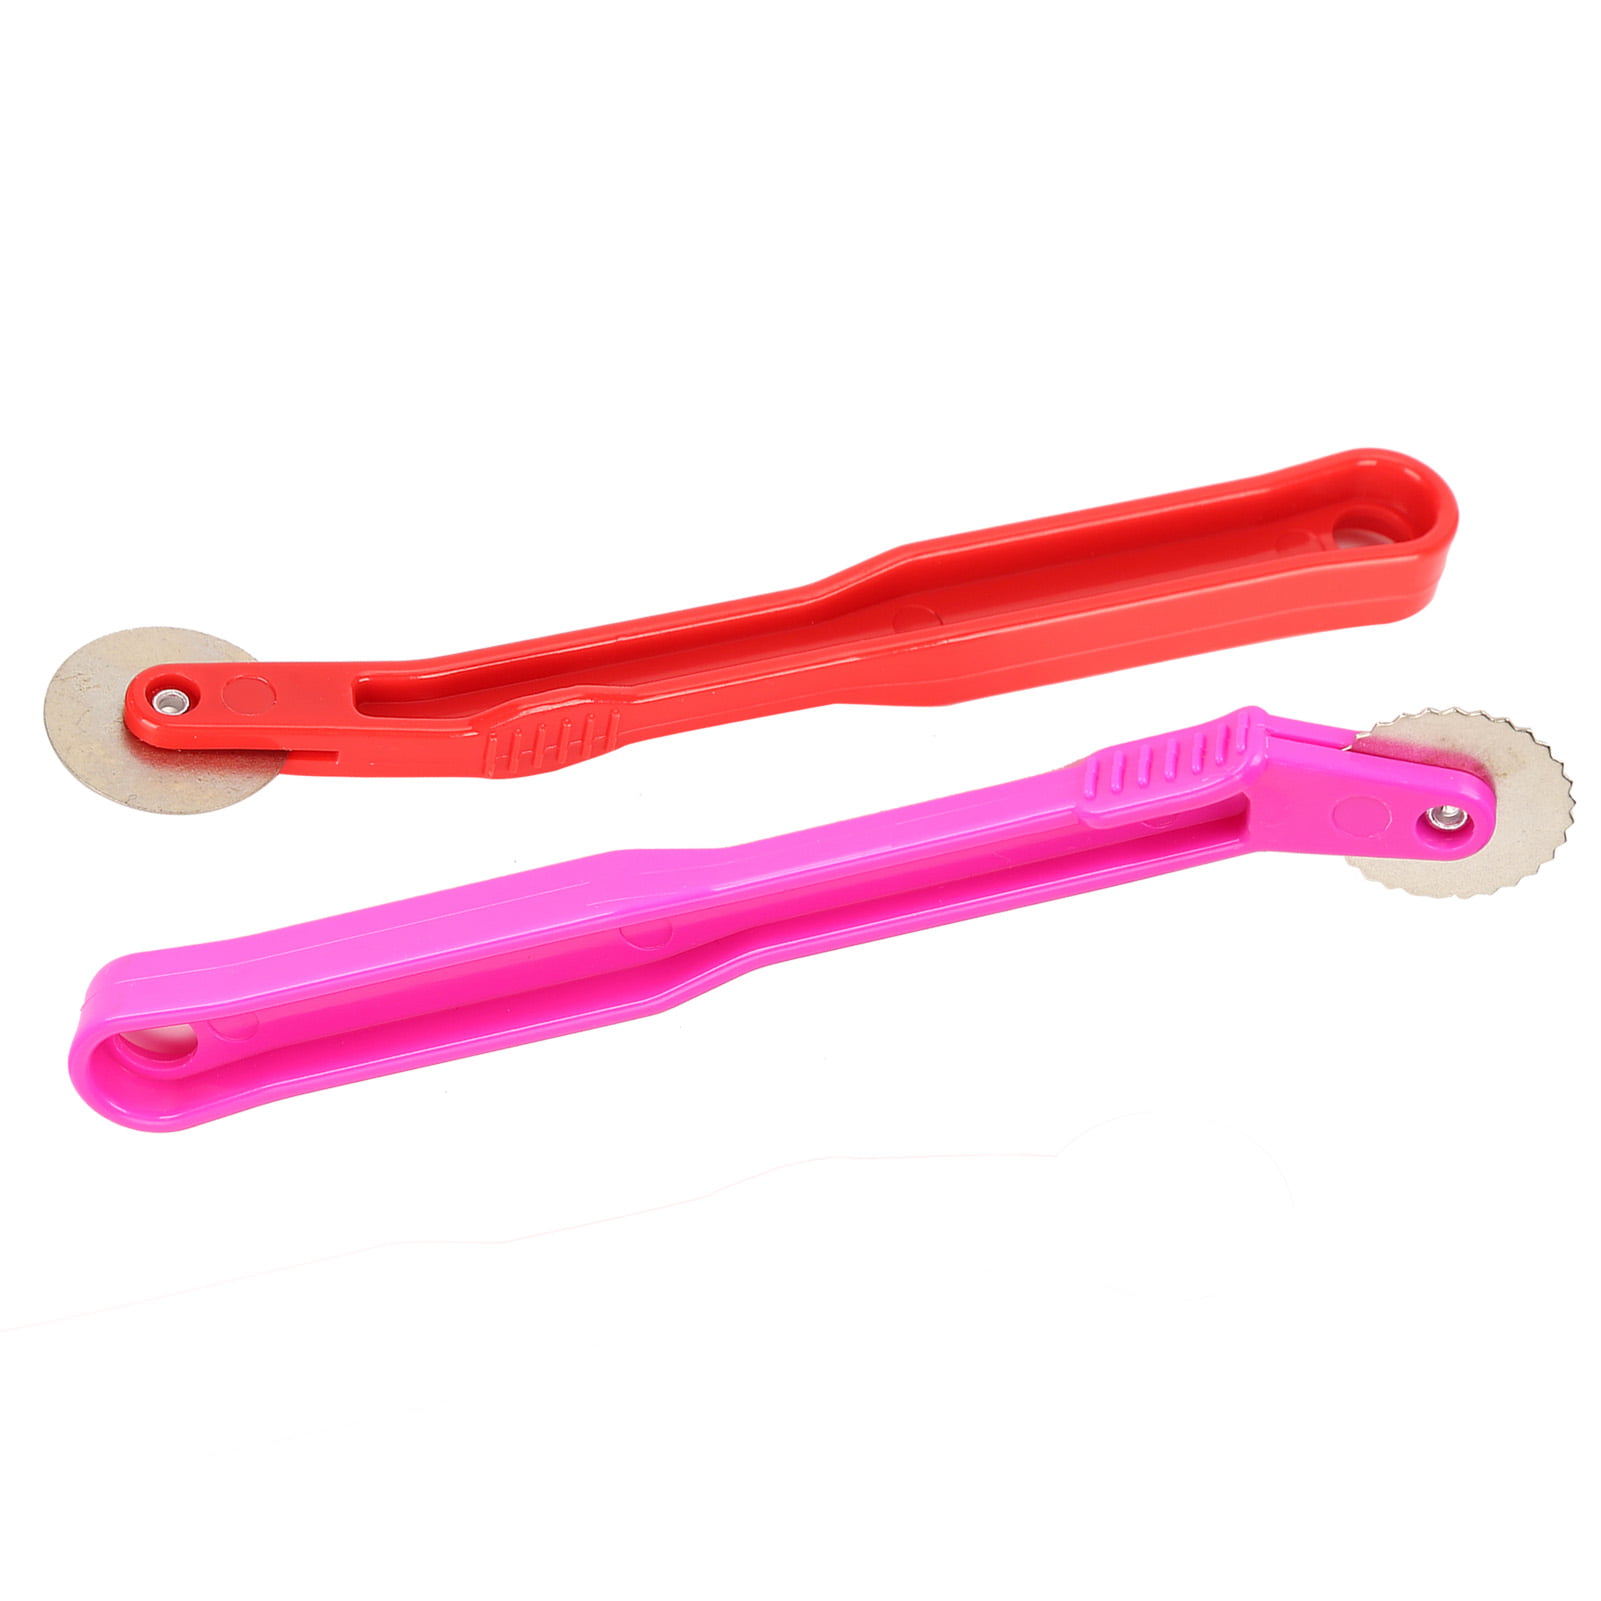 Tracing Wheel Sewing Accessory, Plastic Handles, Choose From 2 Colors,  Various Brands, Transfer Tool Notions 